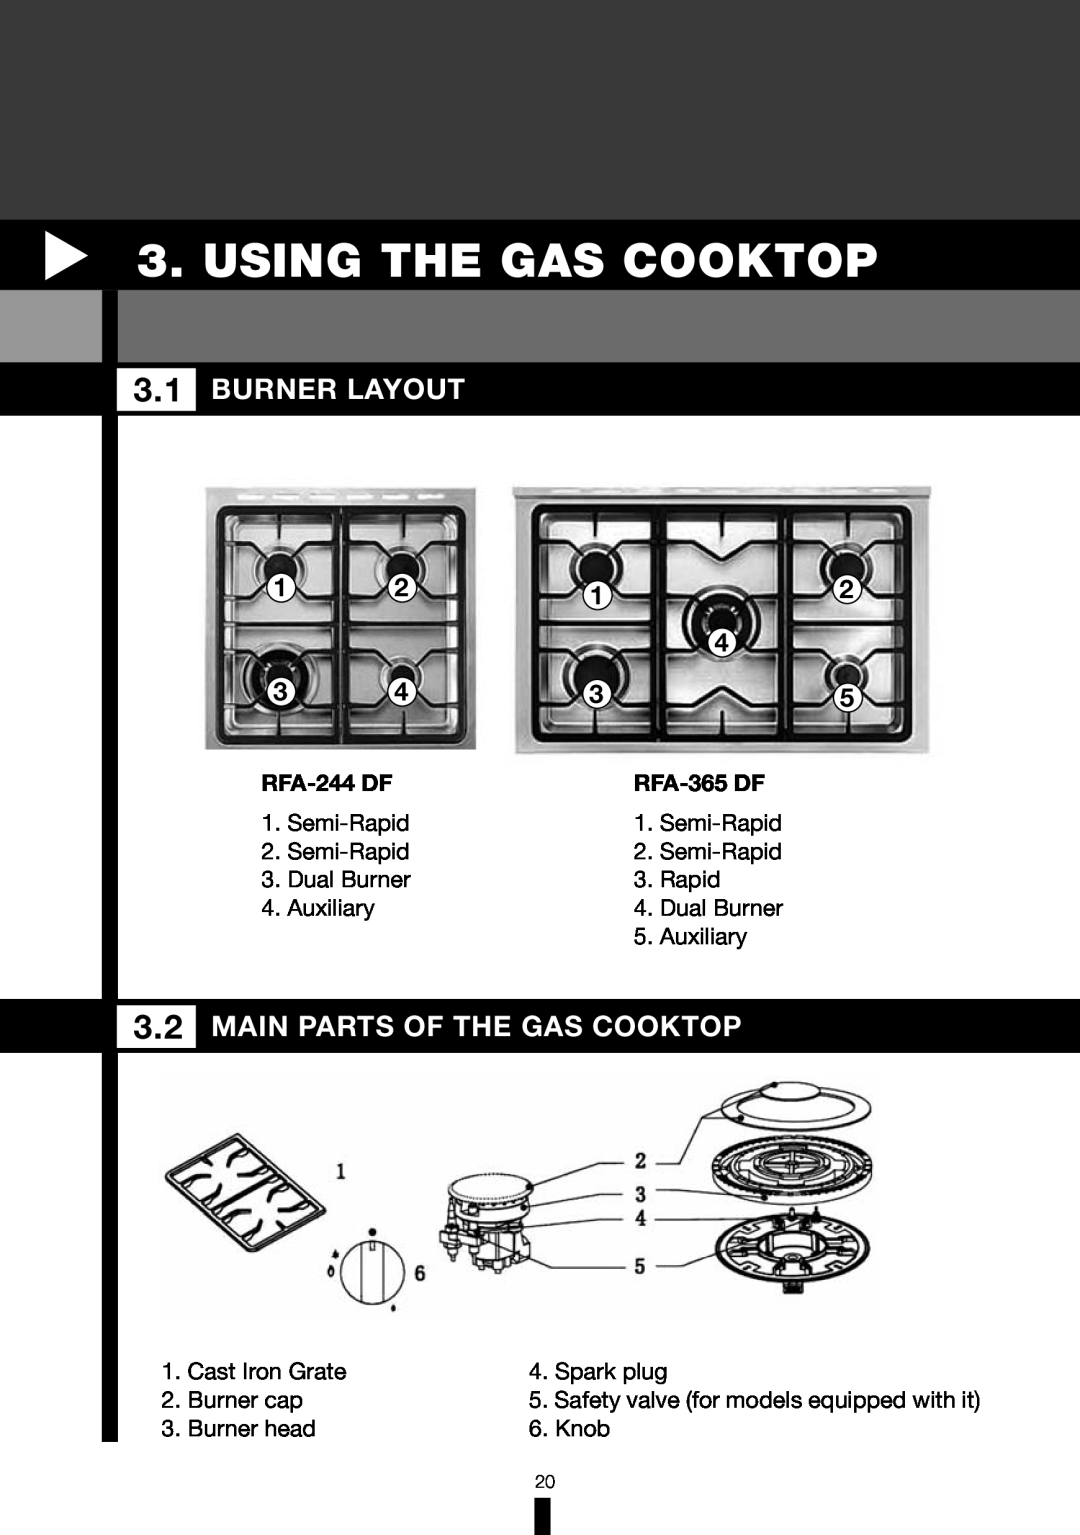 Fagor America RFA-365 DF manual Using The Gas Cooktop, Burner Layout, Main Parts Of The Gas Cooktop, RFA-244 DF 